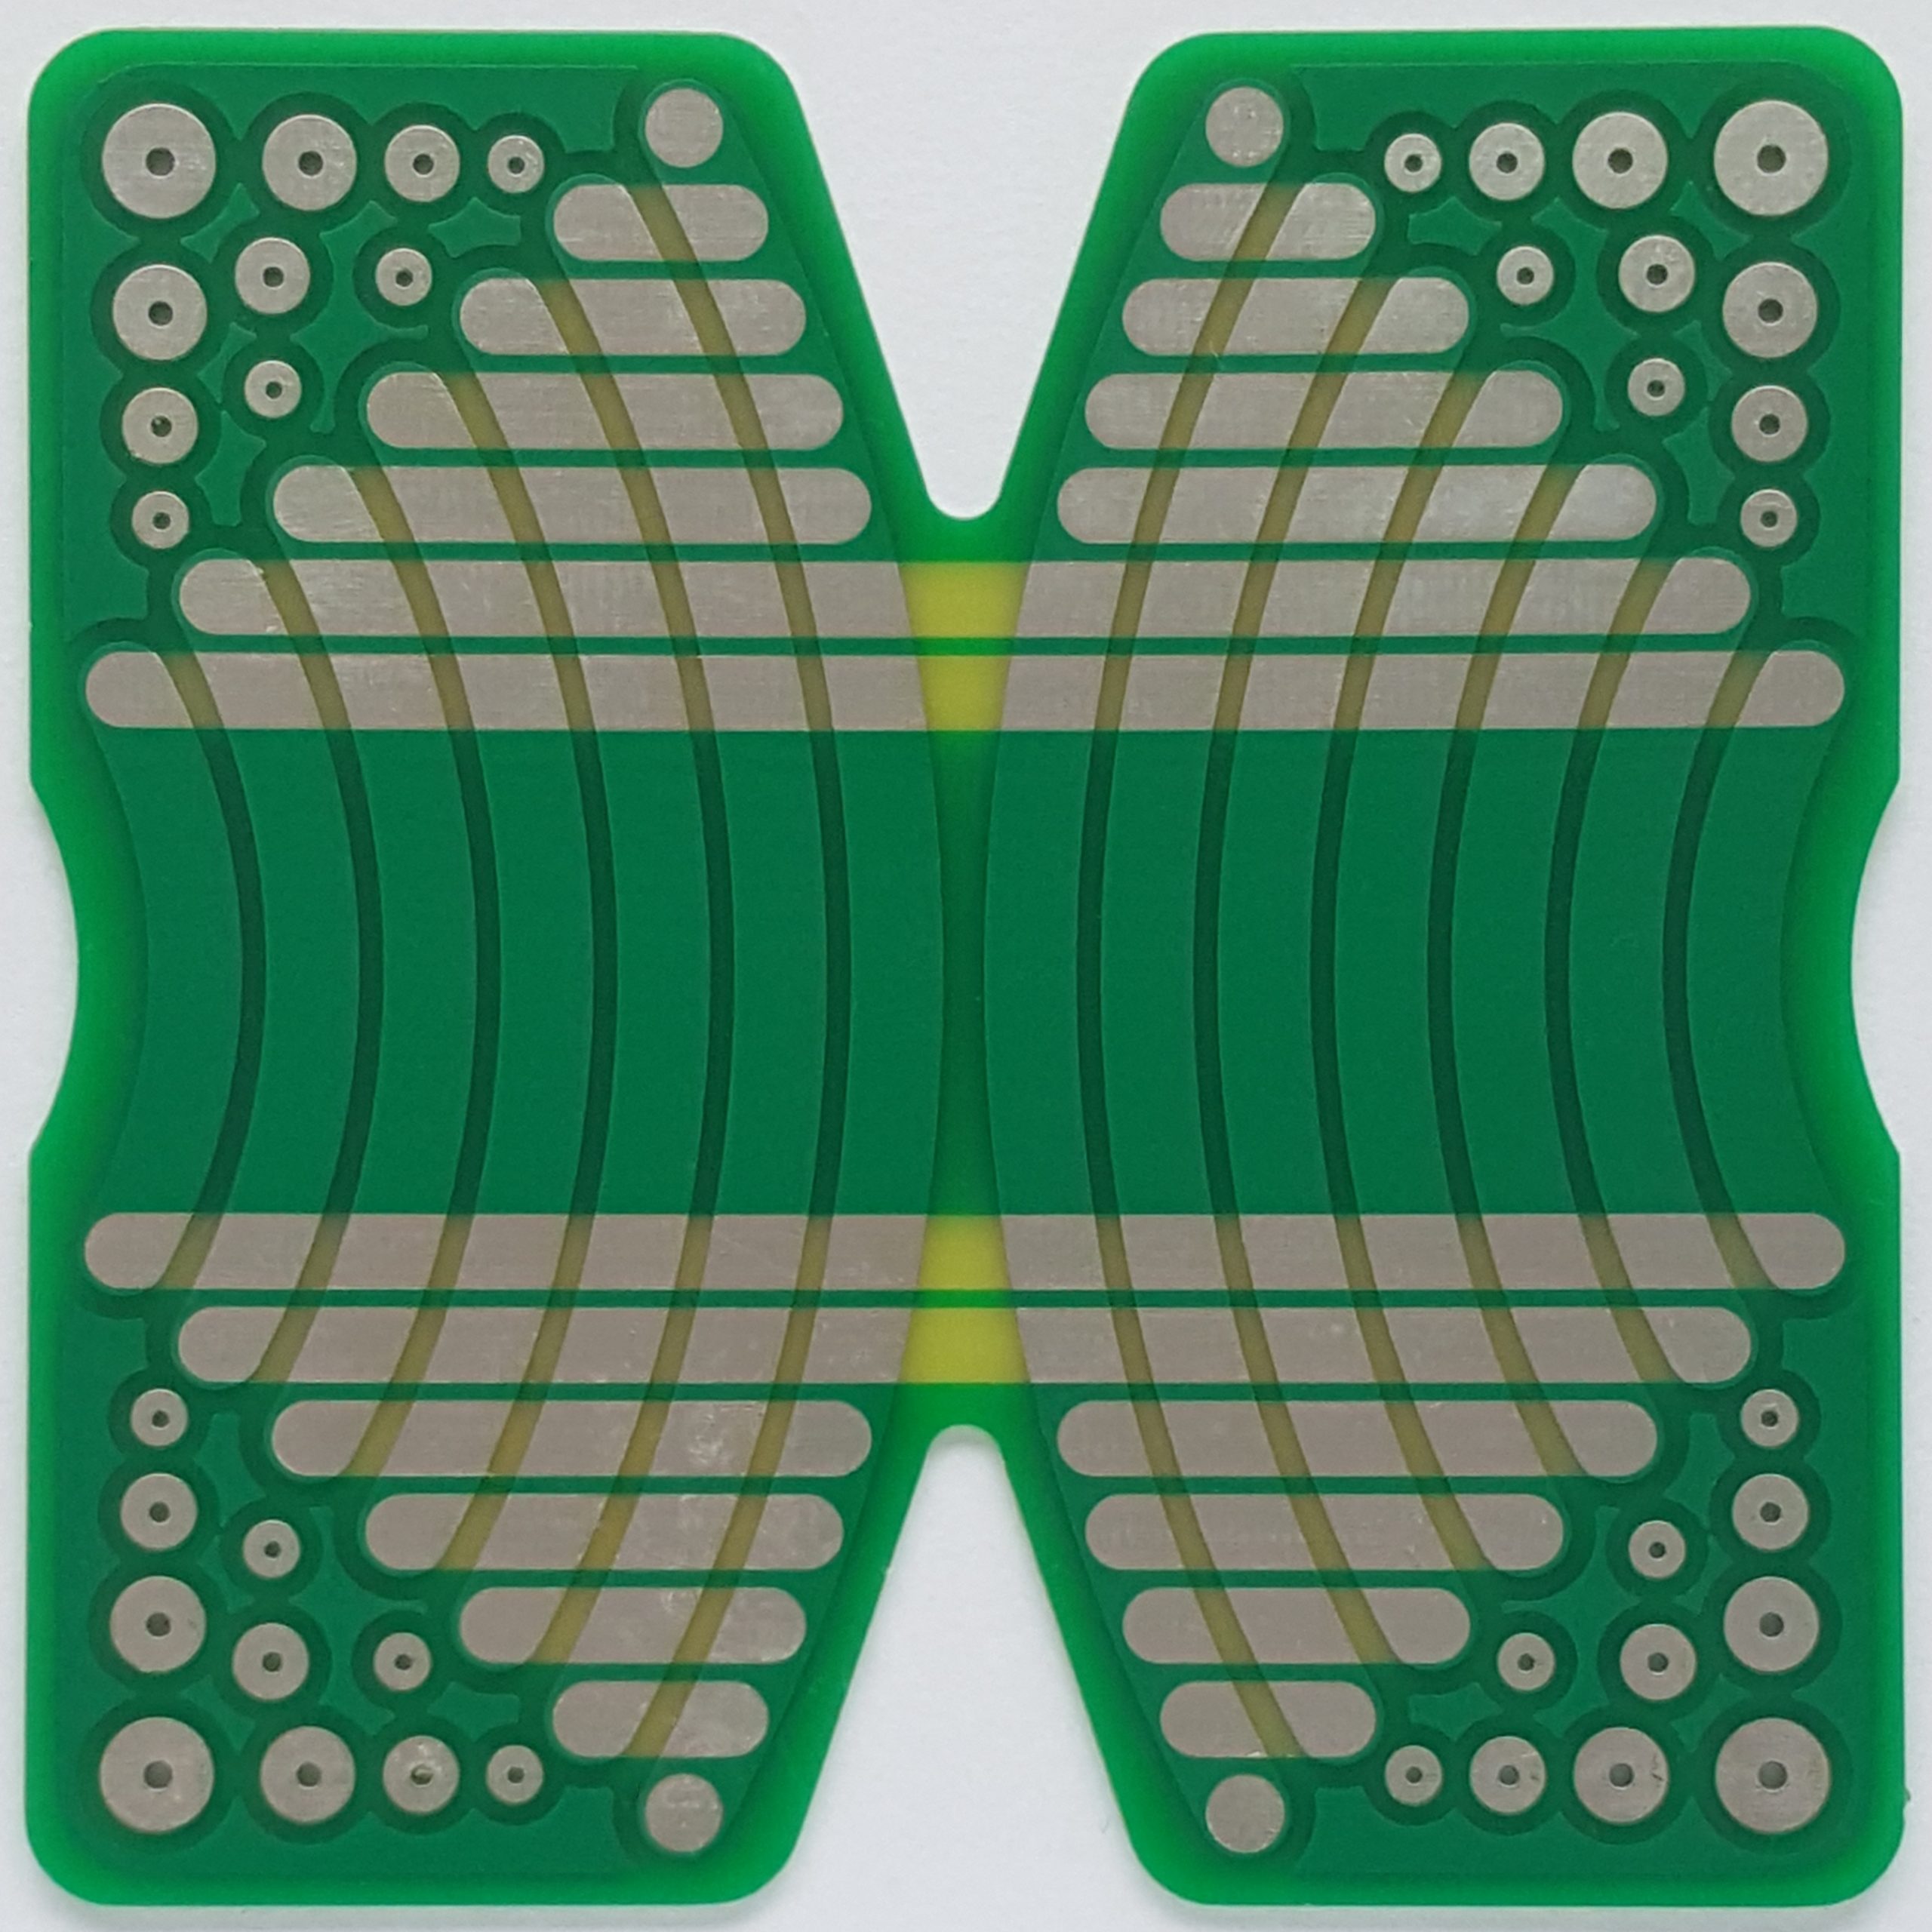 Tibi Chelcea, PCB Drawing #2, 2016, Custom-designed circuit board, 4 x 4 inches, Courtesy of the artist